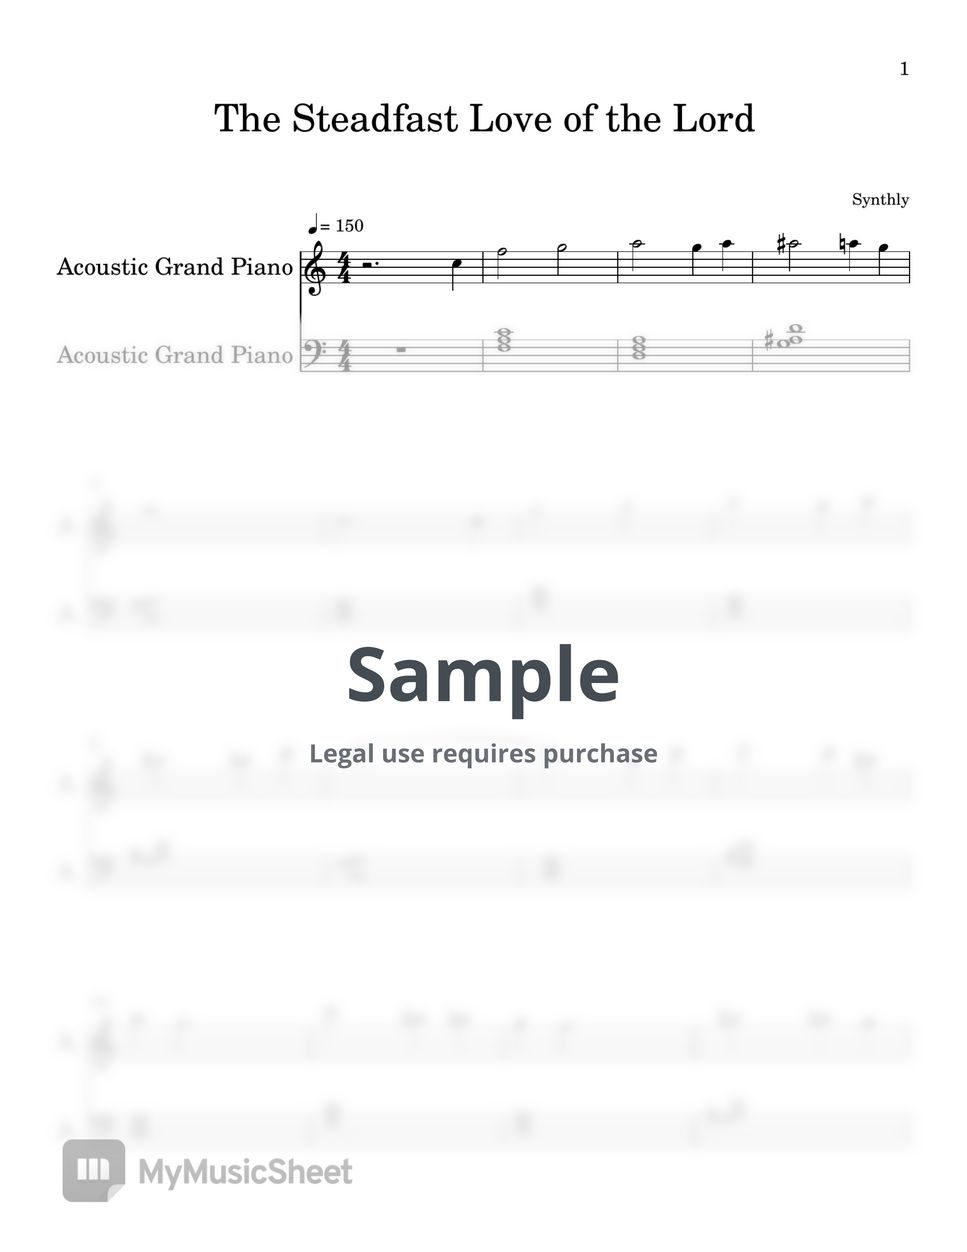 Synthly - The Steadfast Love of the Lord (EASY PIANO SHEET) by Synthly